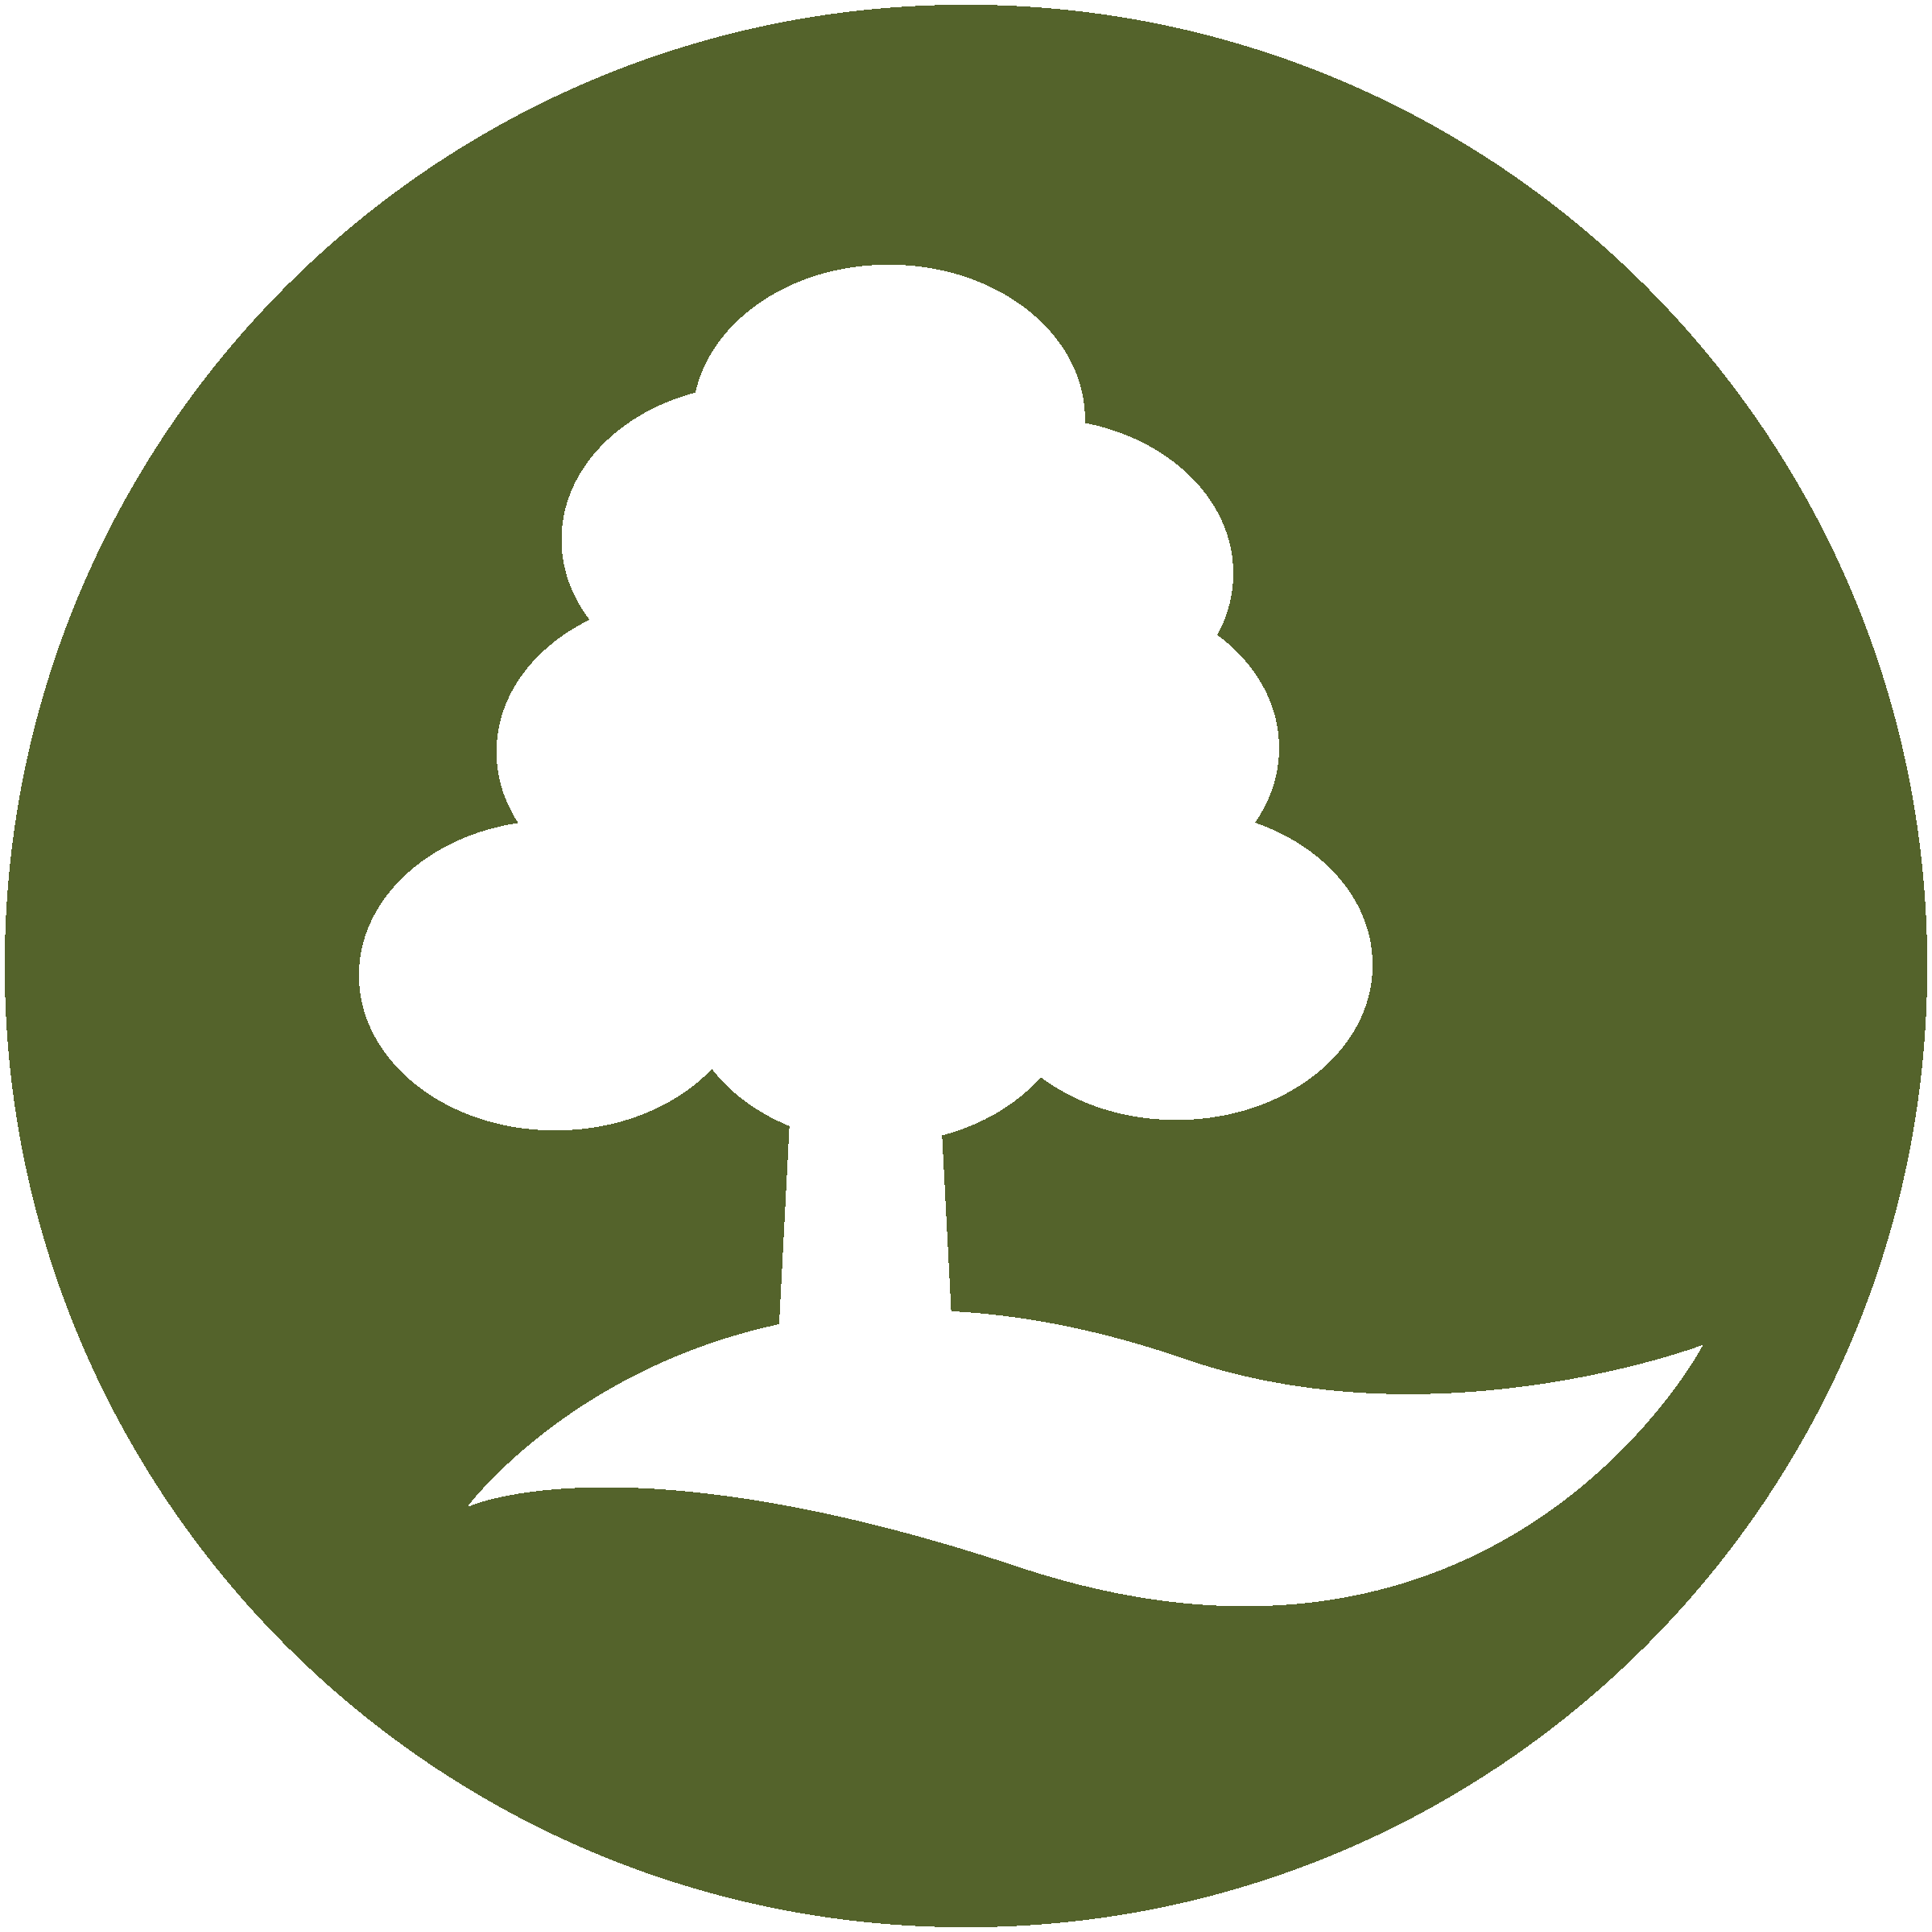 icon of hilly area with tree